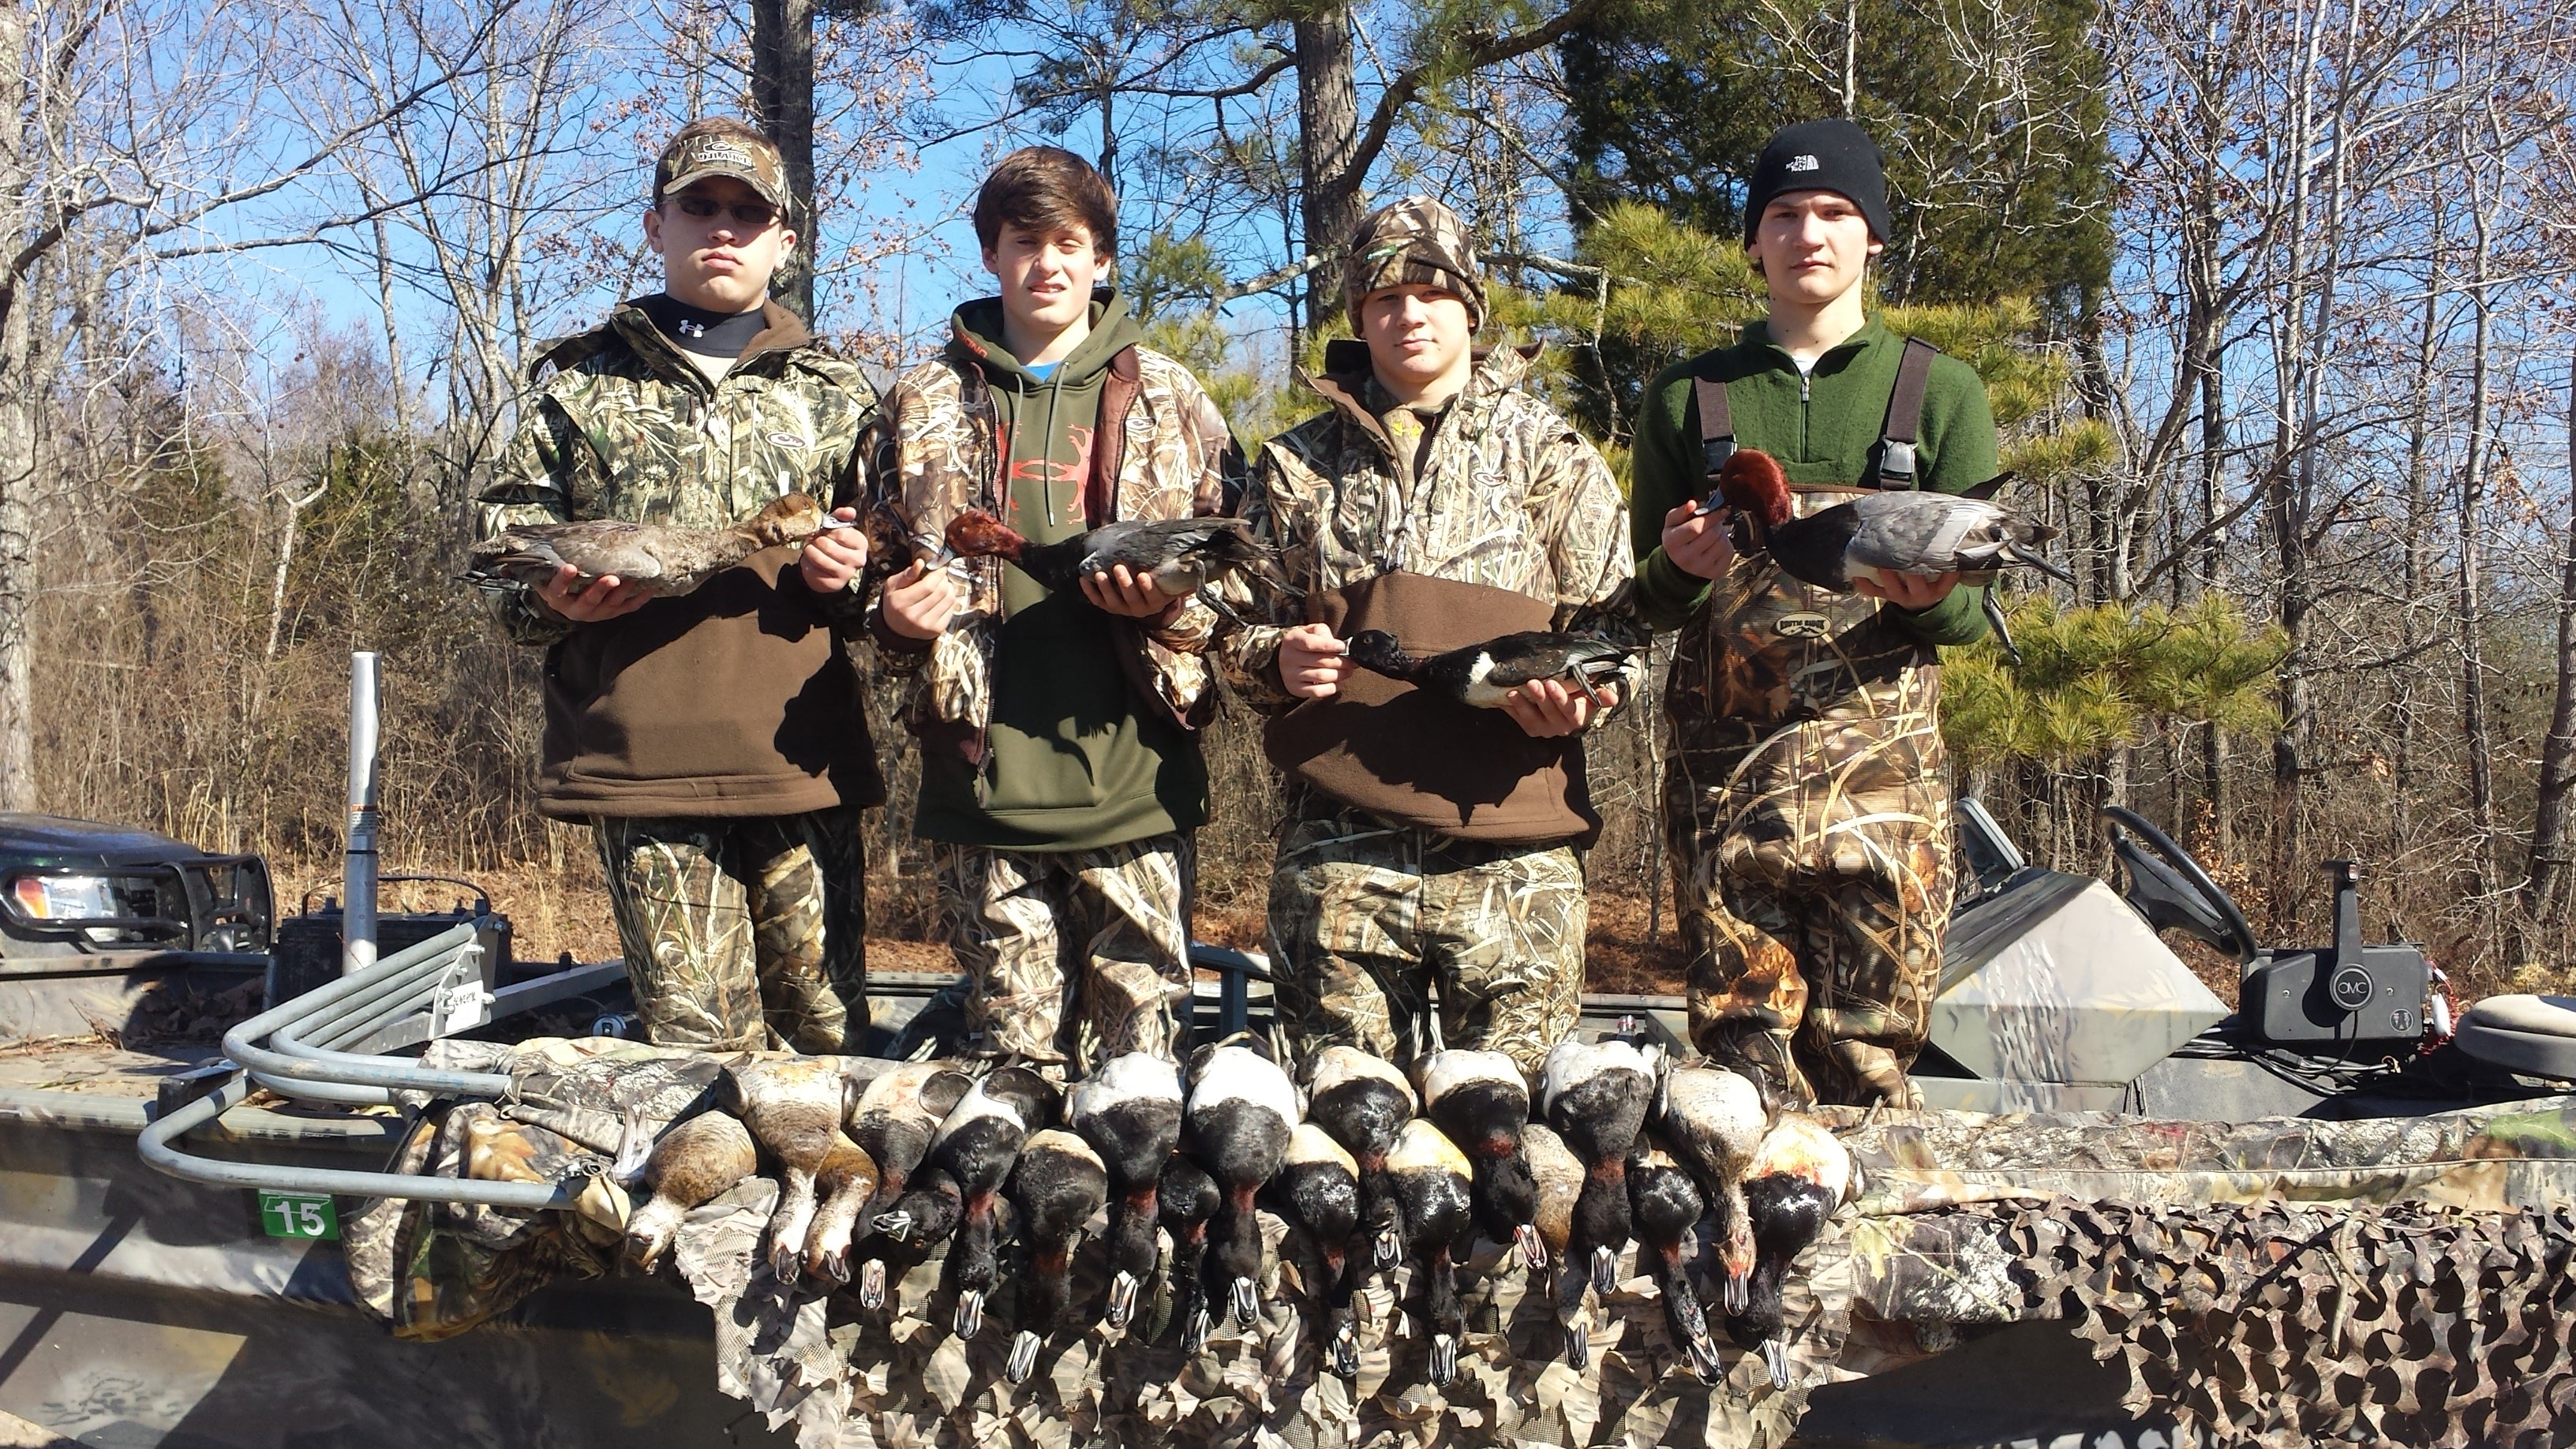 Special youth, active military and military veterans waterfowl hunting days are set for November 2021, and February 5, 2022.